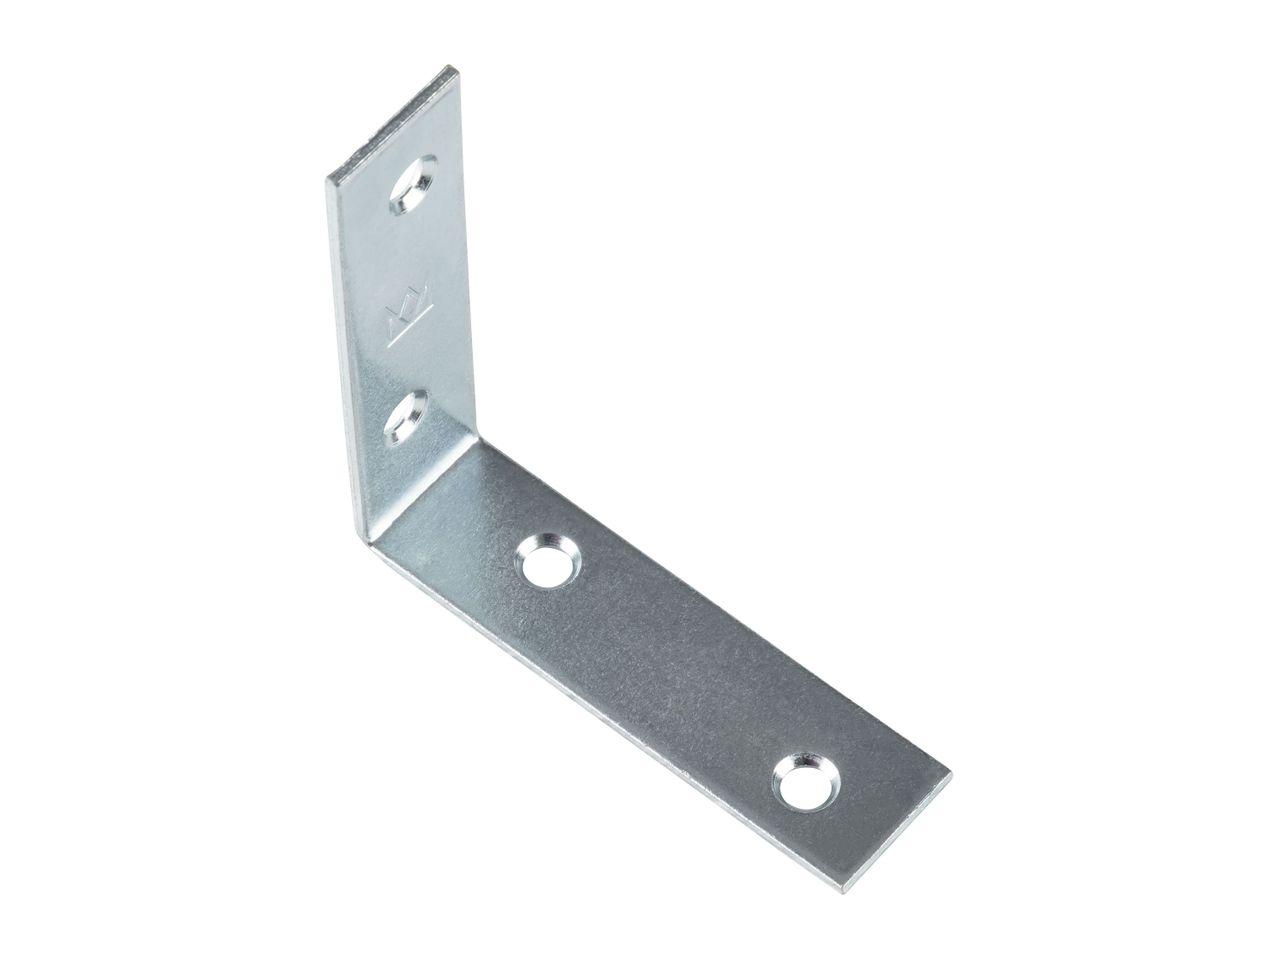 Go to full screen view: PARKSIDE Angle Brackets / Mending Plates / T-Brackets / Corner Braces - Image 3